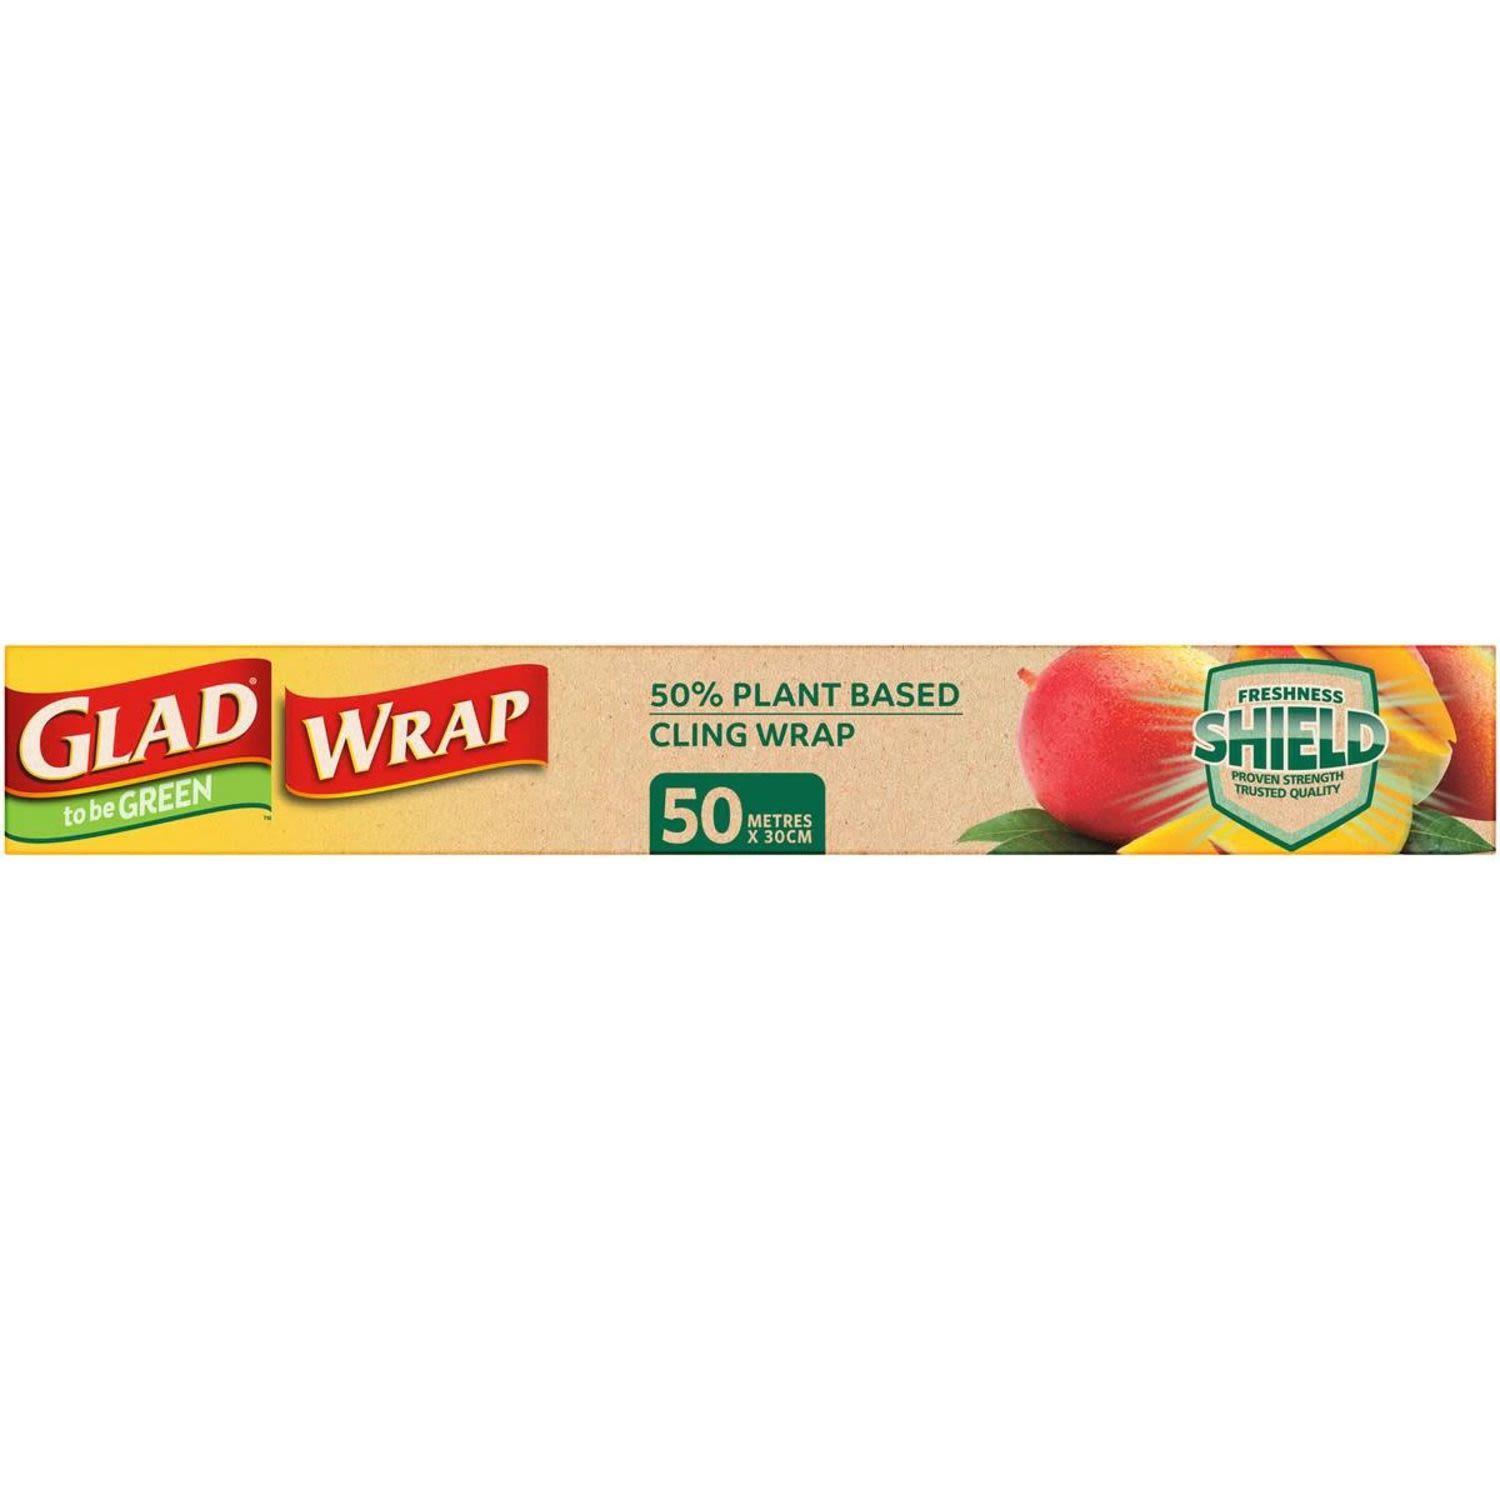 Glad To Be Green 50% Plant Based Cling Wrap 50m, 1 Each